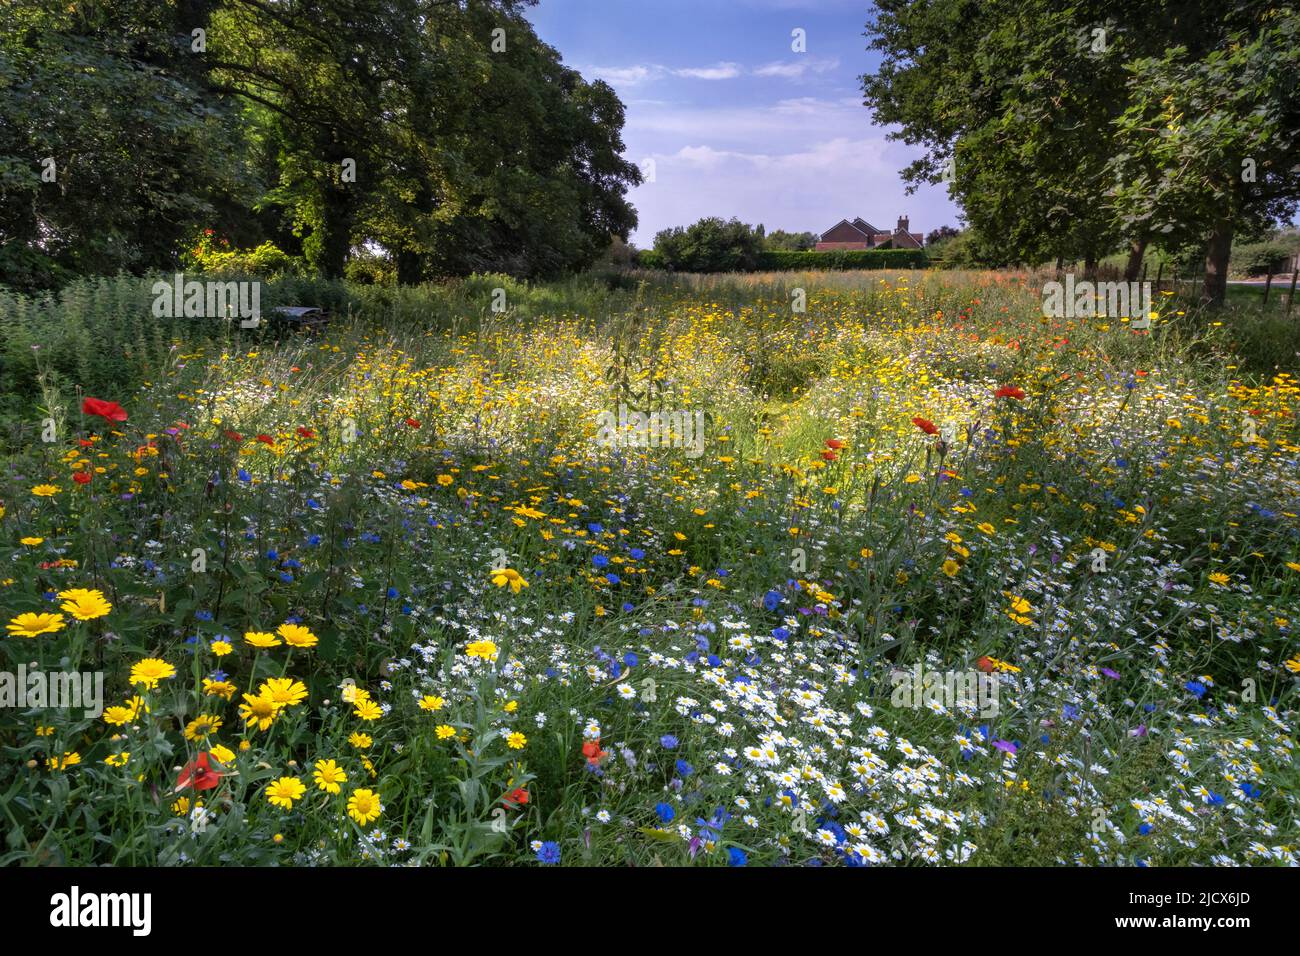 A beautiful wildflower meadow in summer, near Tarvin, Cheshire, England, United Kingdom, Europe Stock Photo